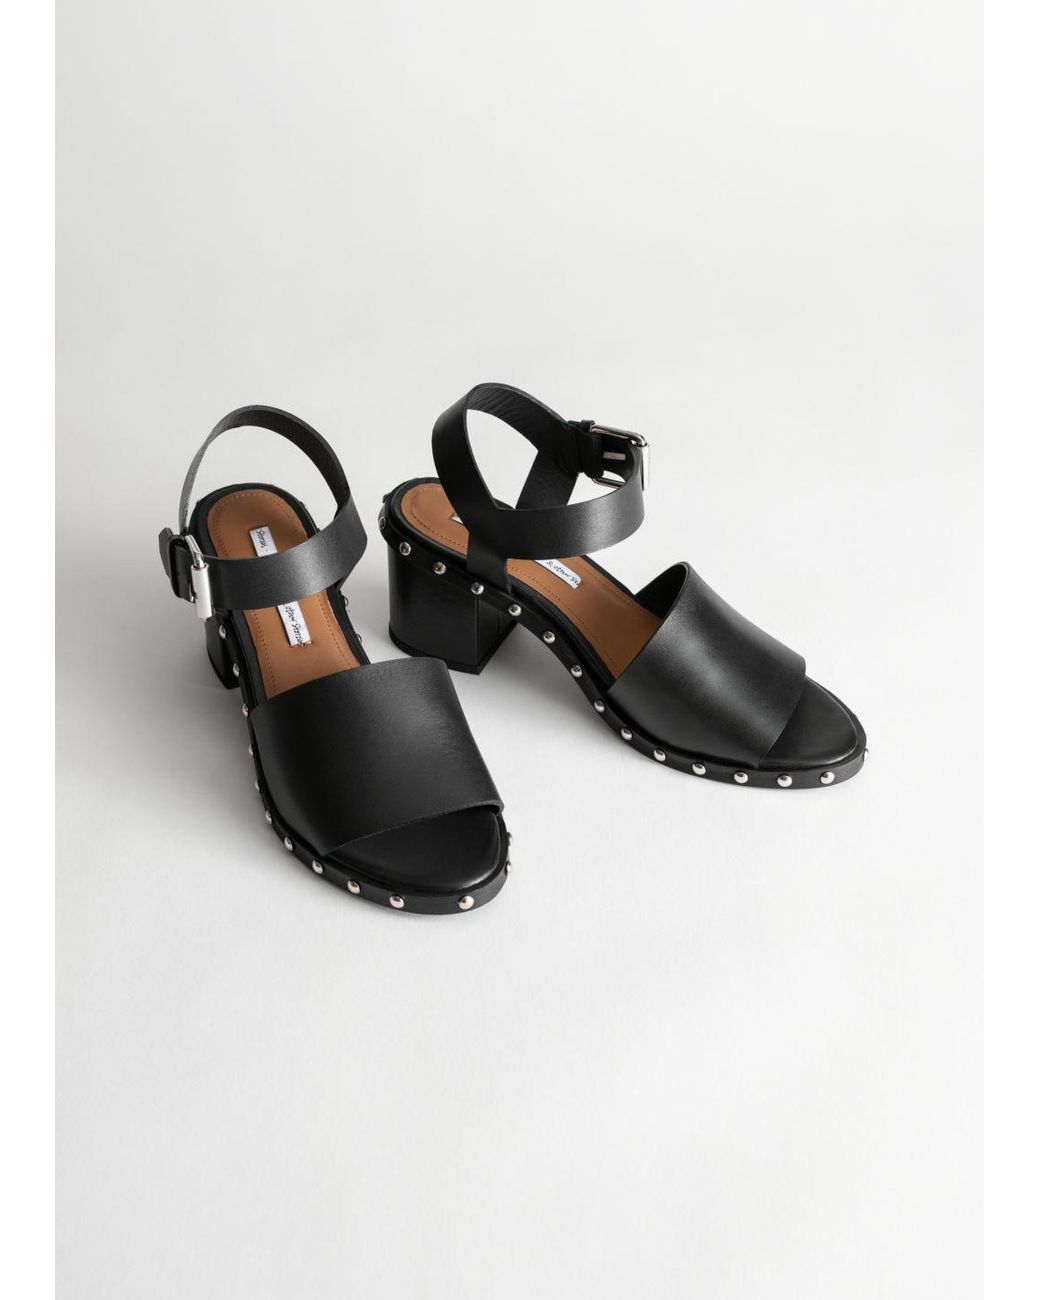 & Other Stories Studded Leather Heeled Sandals in Black | Lyst Canada